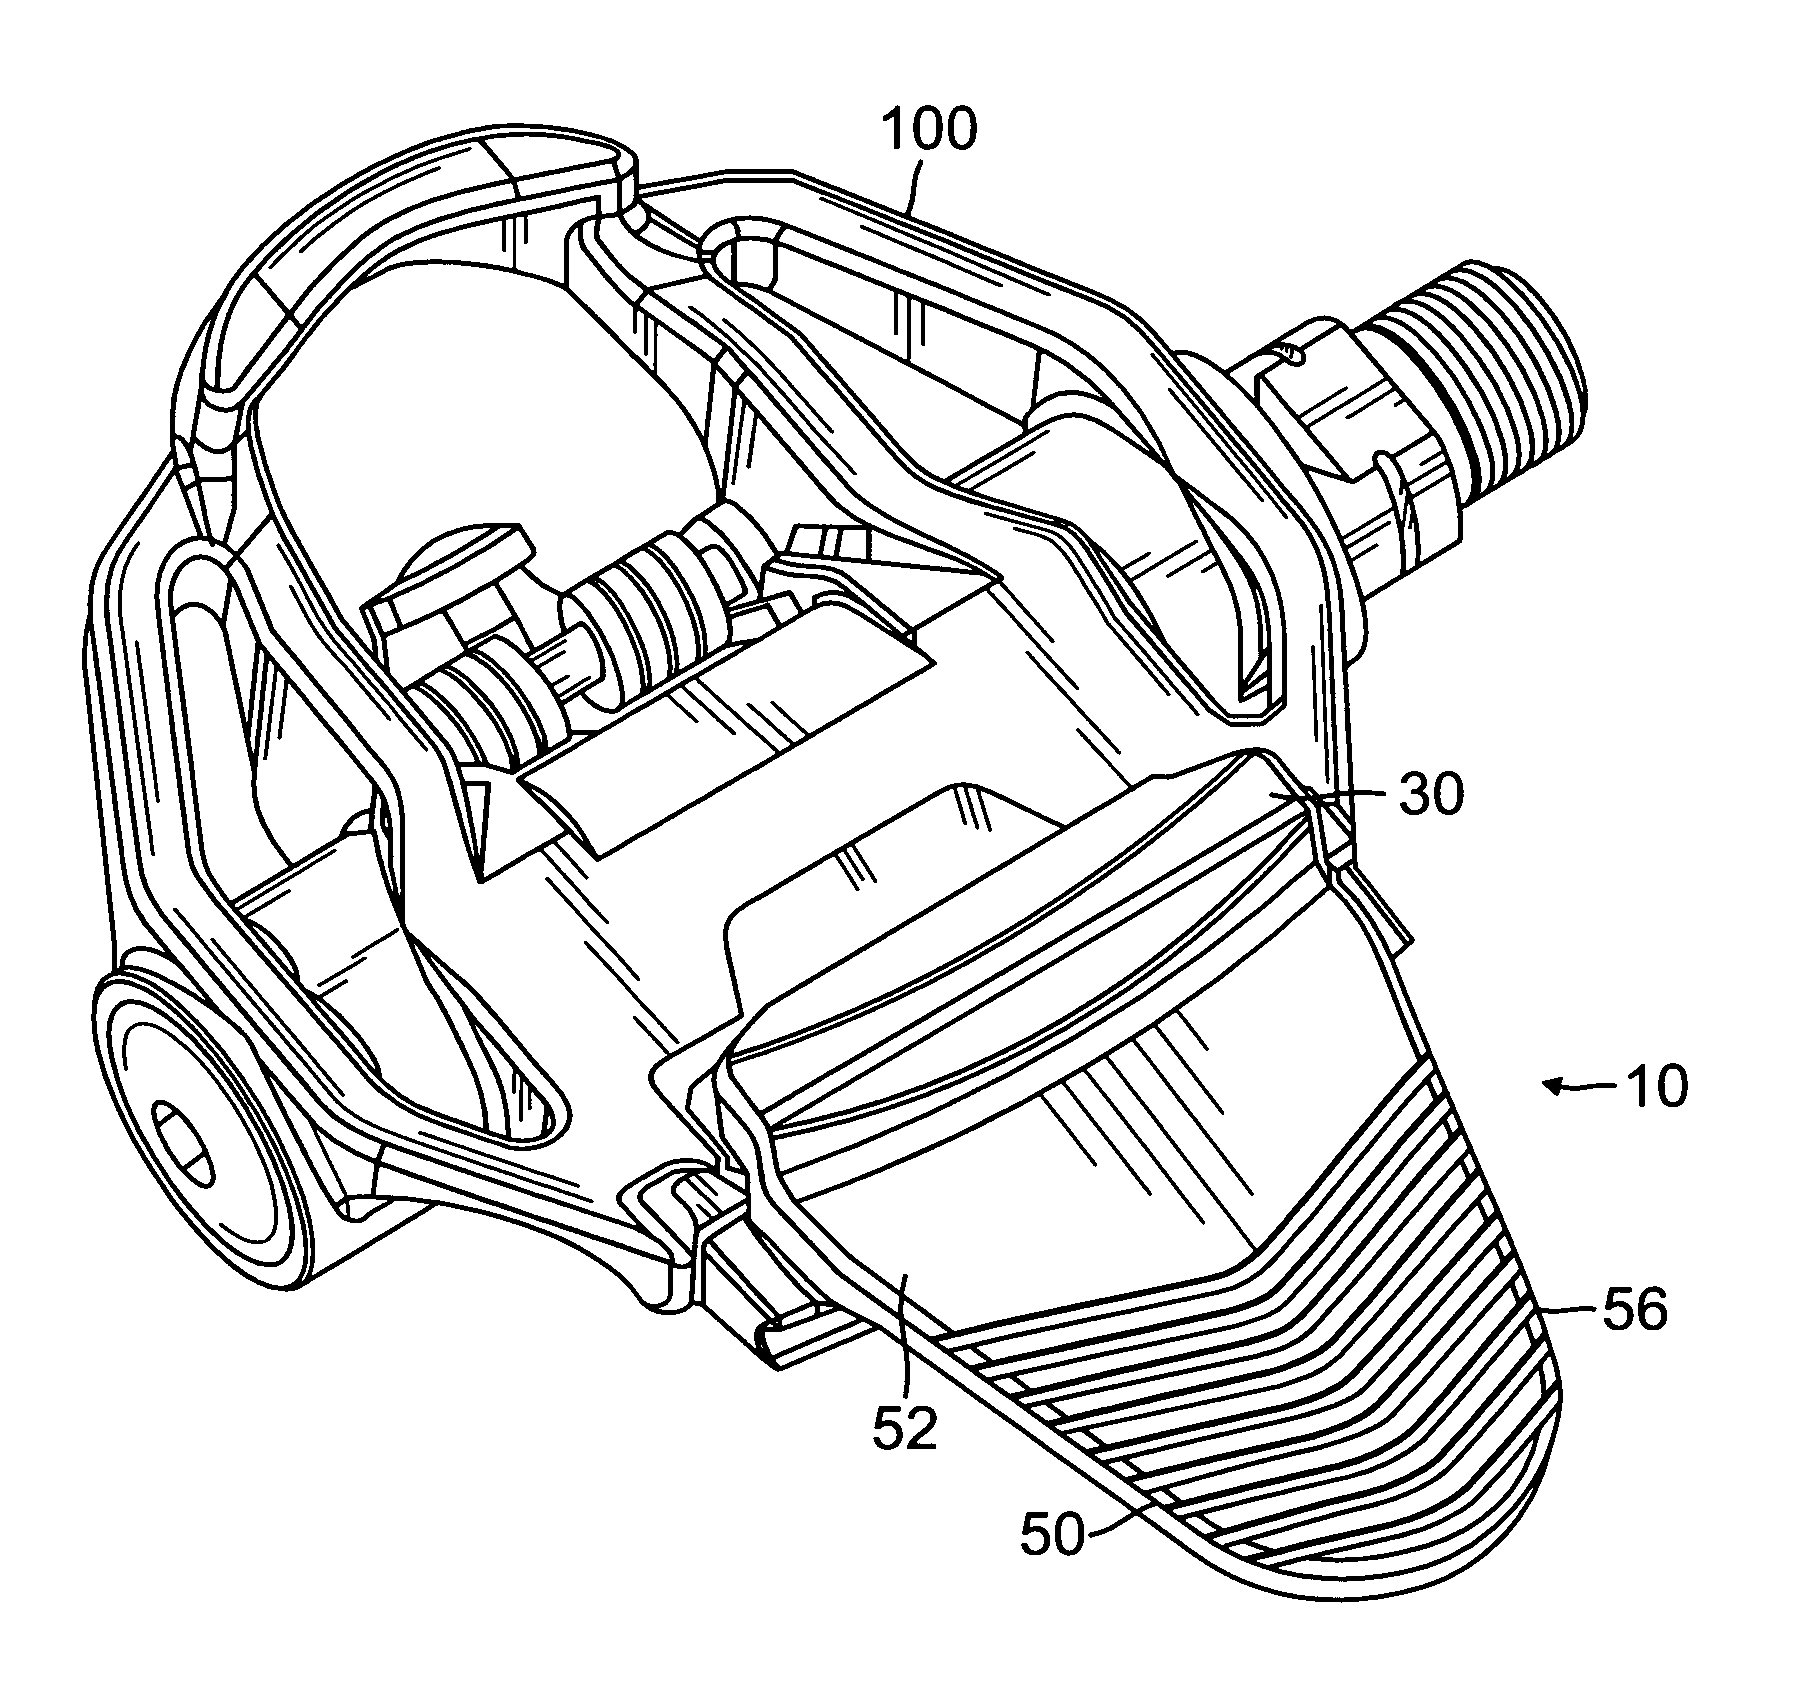 Spring-loaded retention and release mechanism for use on clipless bicycle pedals